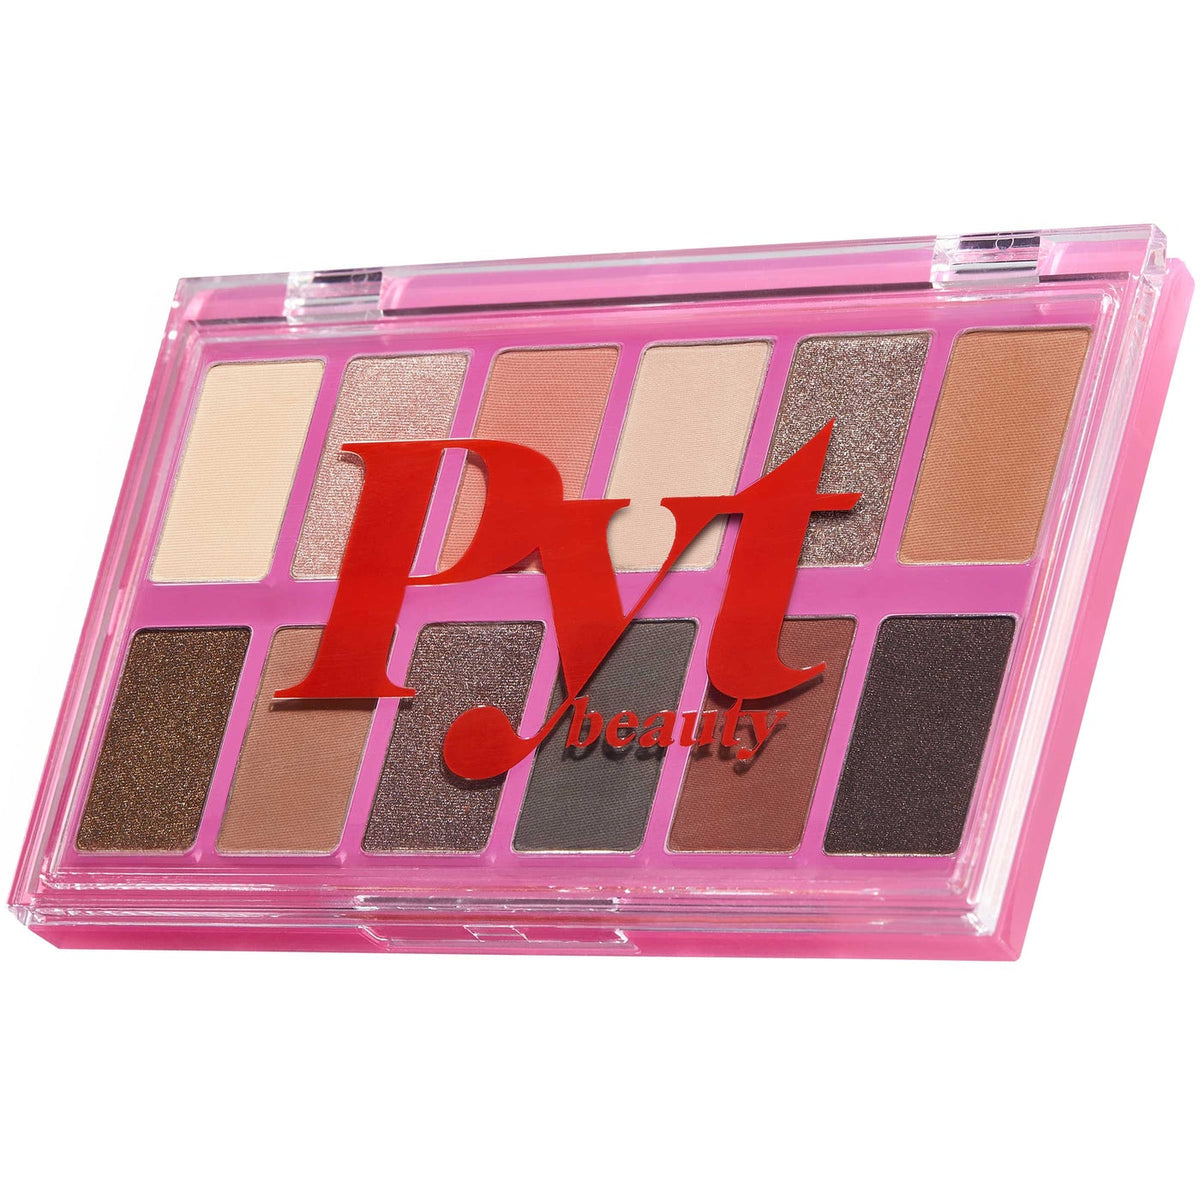 PYT Beauty® Cool Crew Nude - The Upcycle Eyeshadow Palette at Socialite Beauty Canada